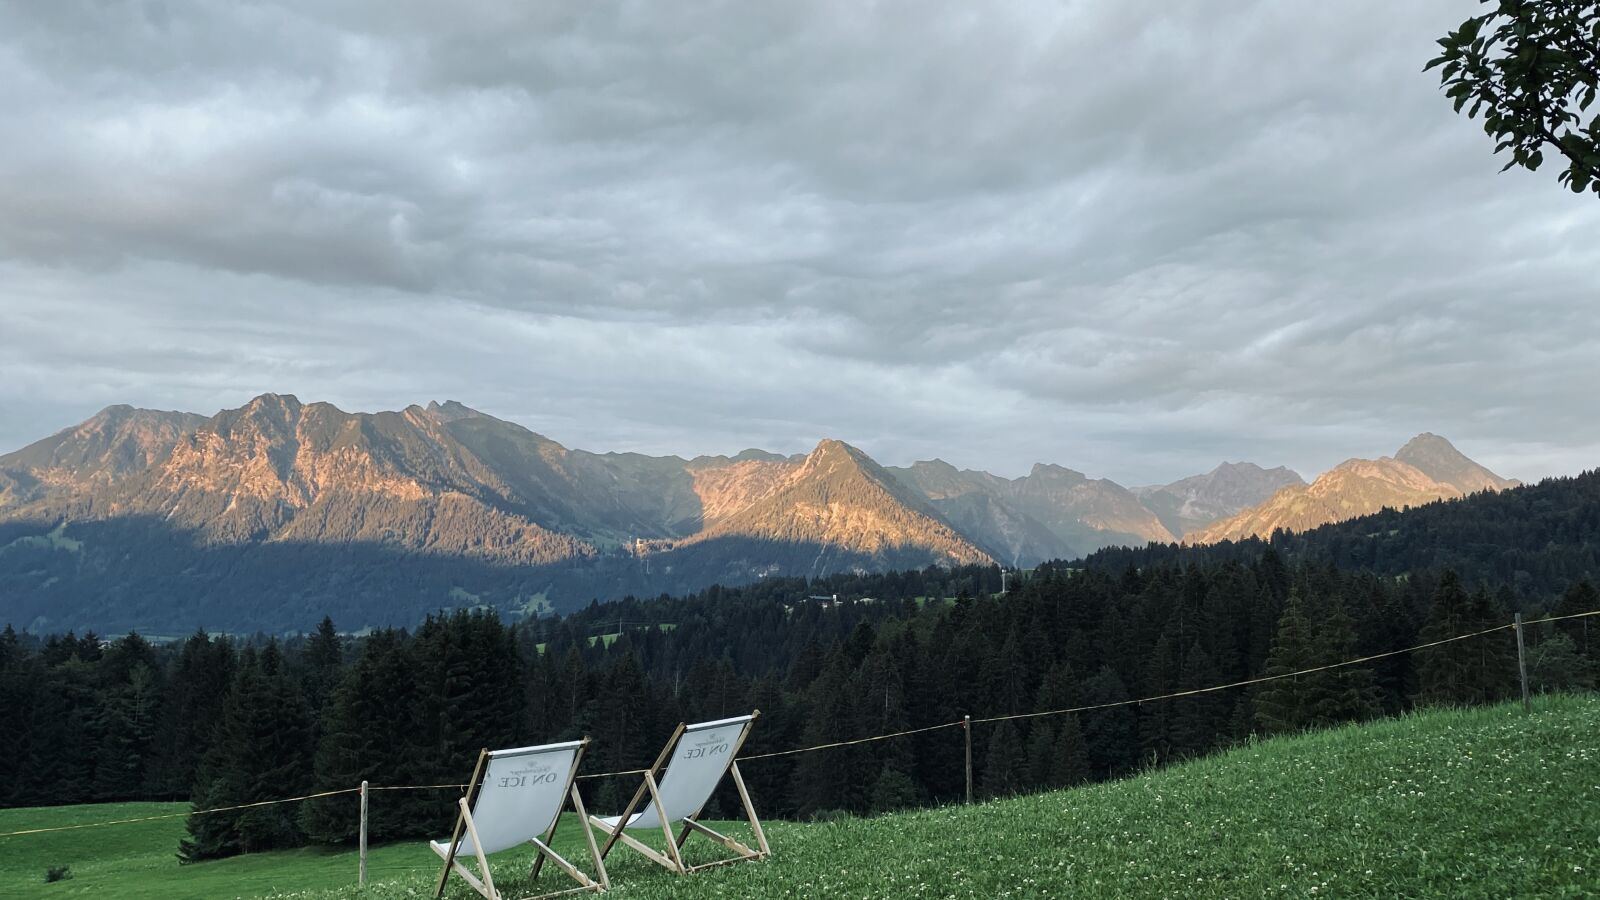 iPhone 11 Pro back triple camera 4.25mm f/1.8 sample photo. Mountains, meadow, deck chair photography